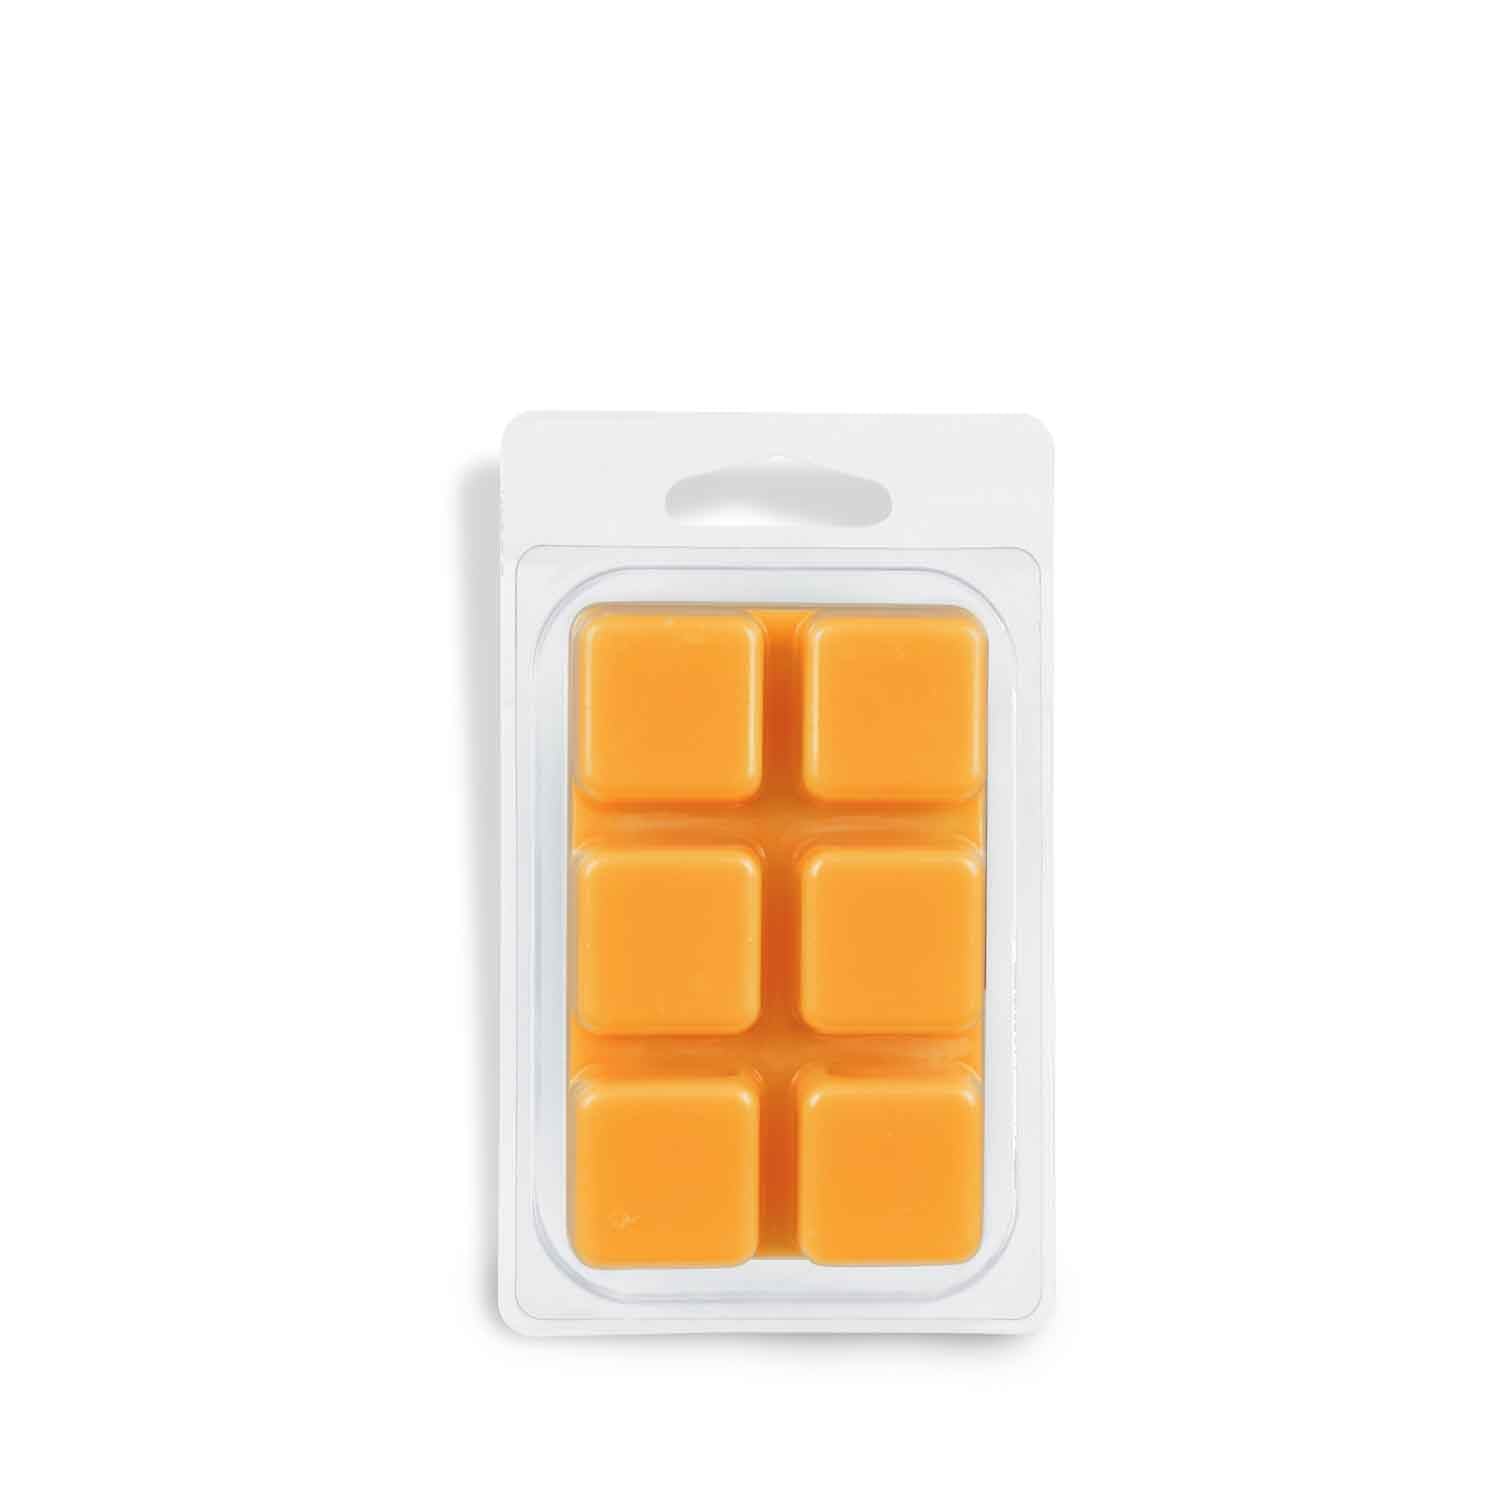 A pack of Papaya Mango Scented Wax Melt (2.5 oz) cubes from Tuscany Candle® on a white background.